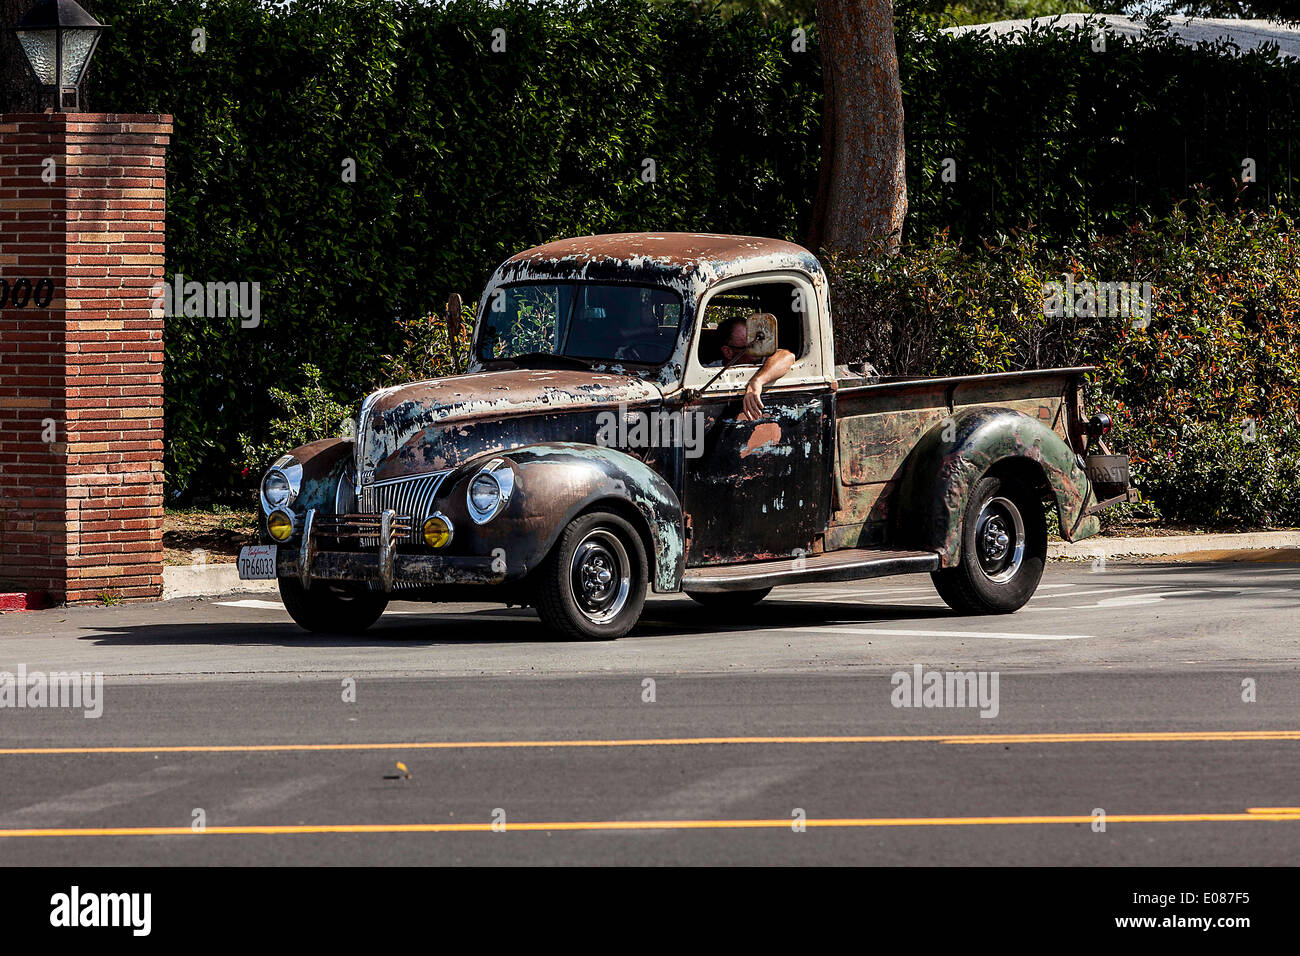 A 1940 Ford Truck Rat Rod Stock Photo